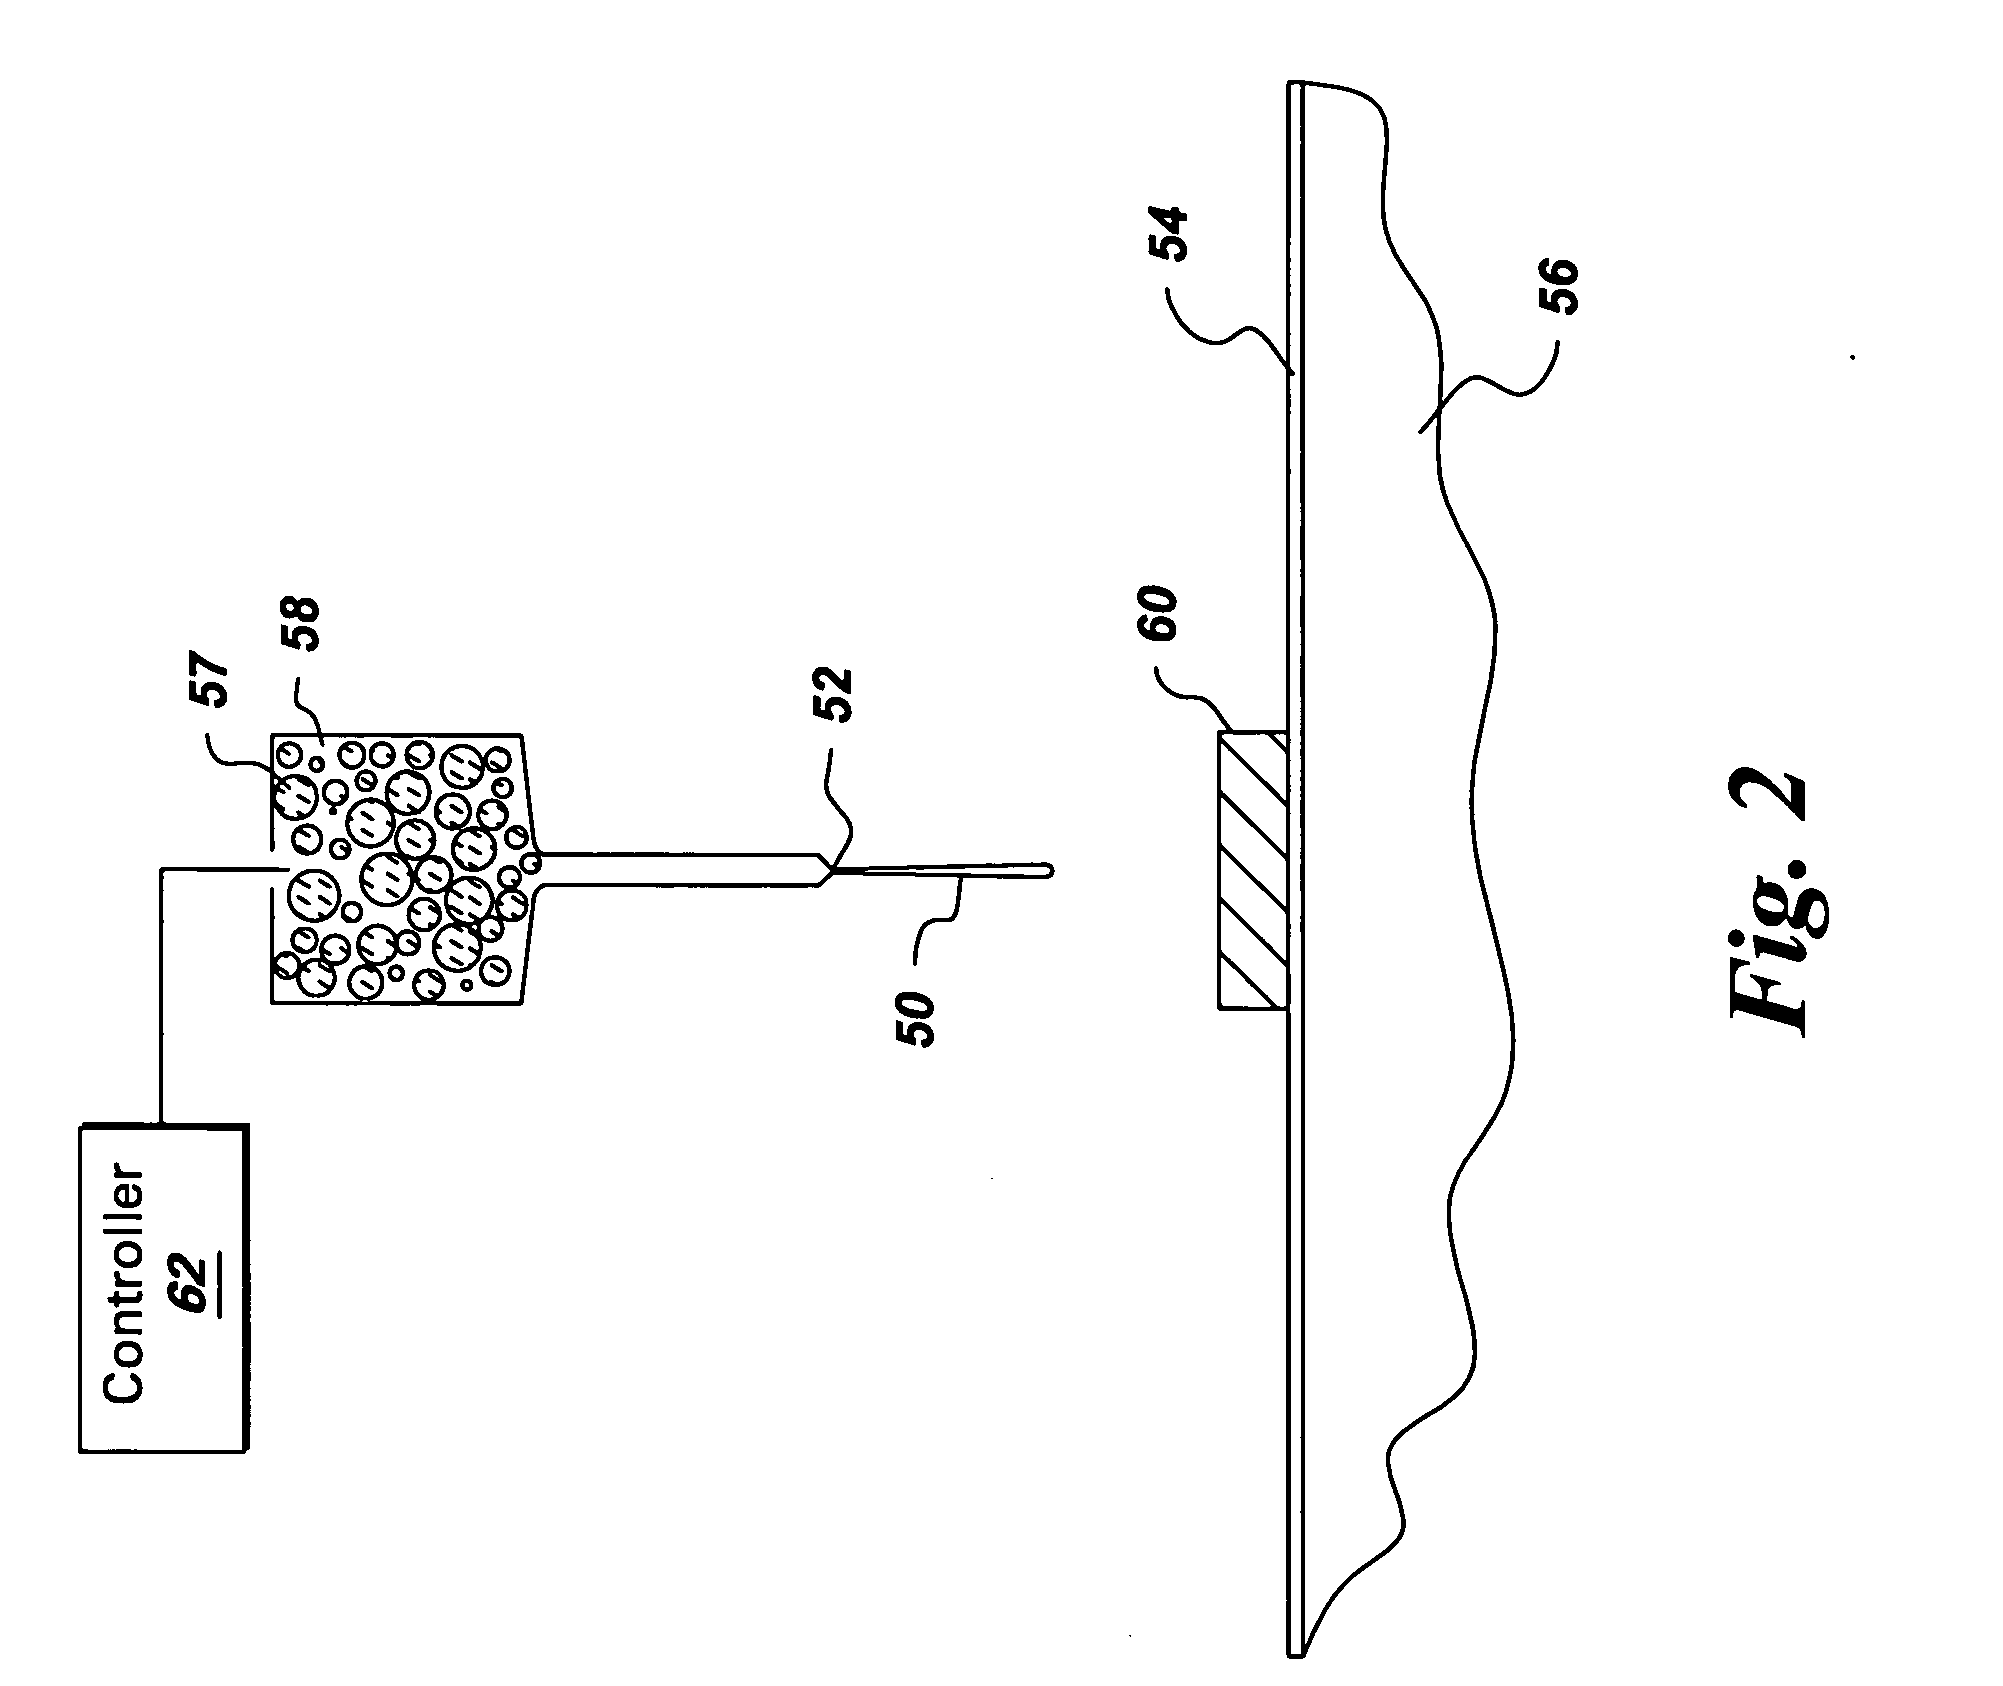 Method of forming concavities in the surface of a metal component, and related processes and articles